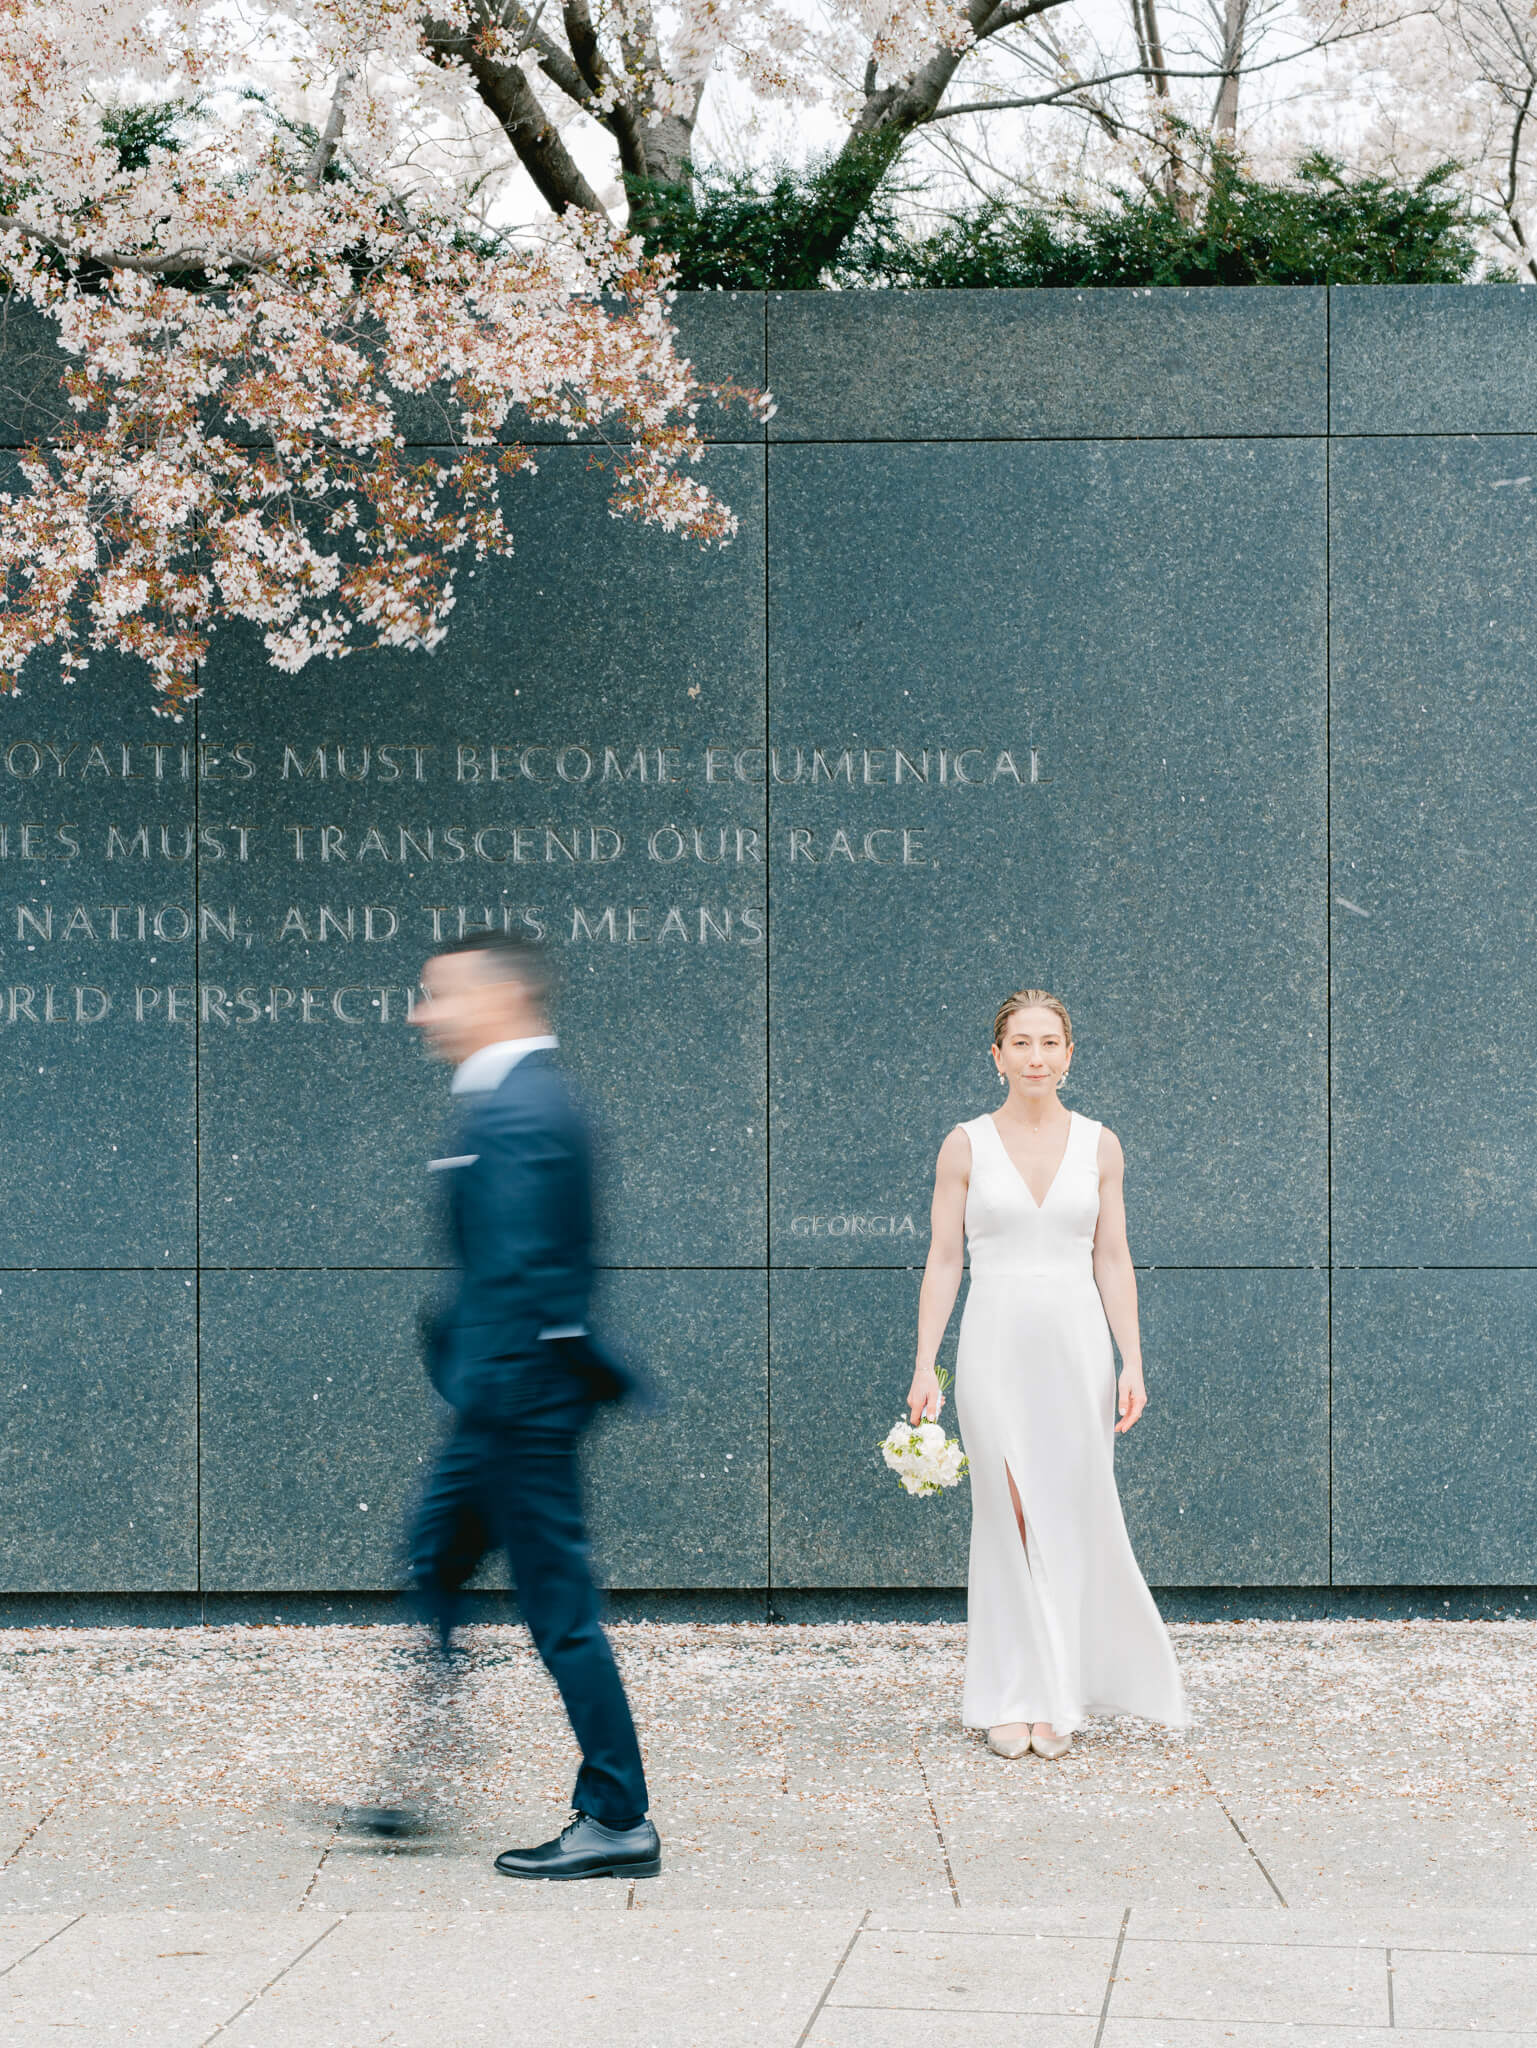 A blurry shot of a groom walking past his bride under the cherry blossoms at the MLK memorial in Washington, D.C.